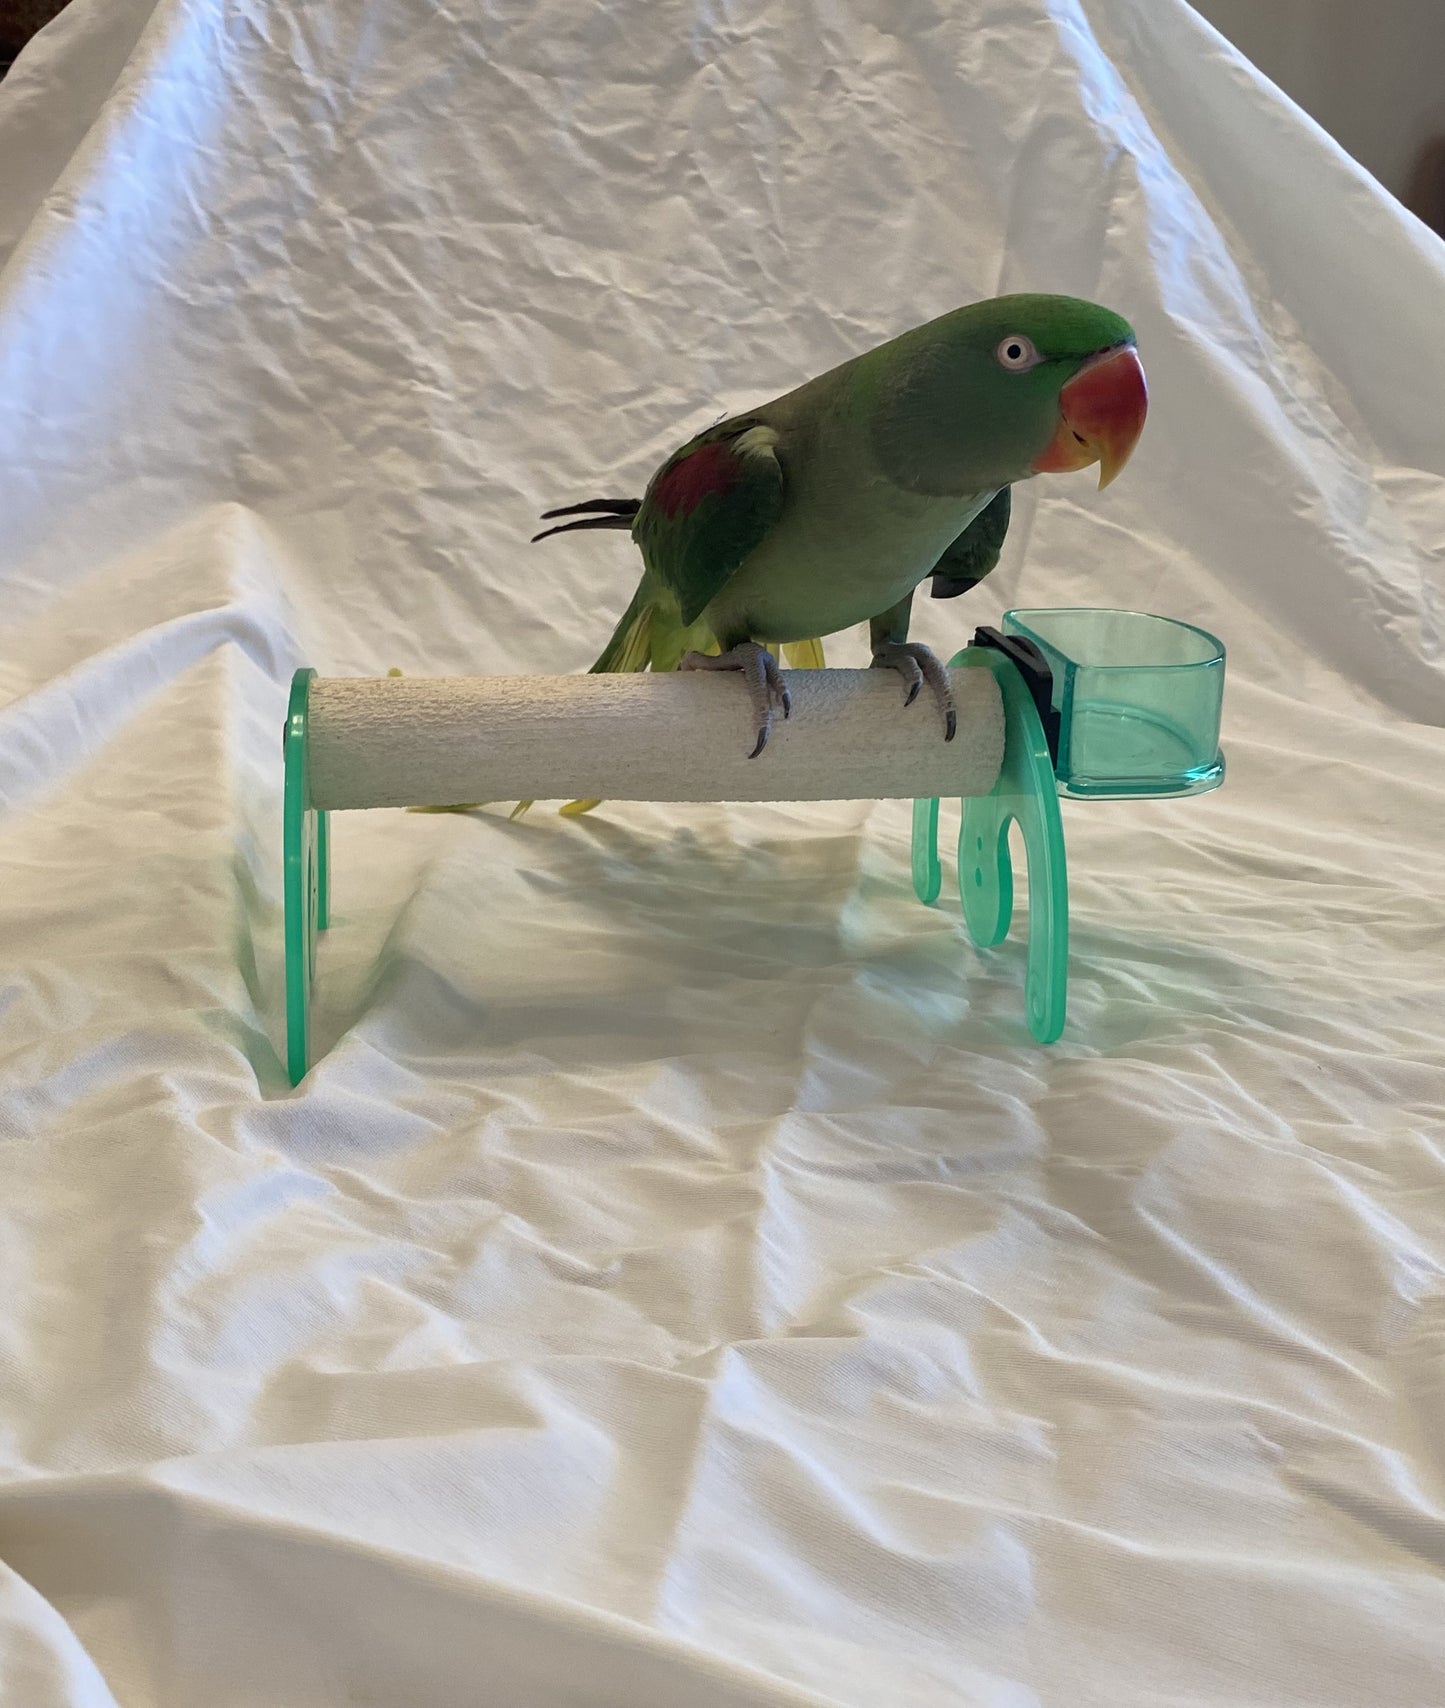 Polly's Mini Stands